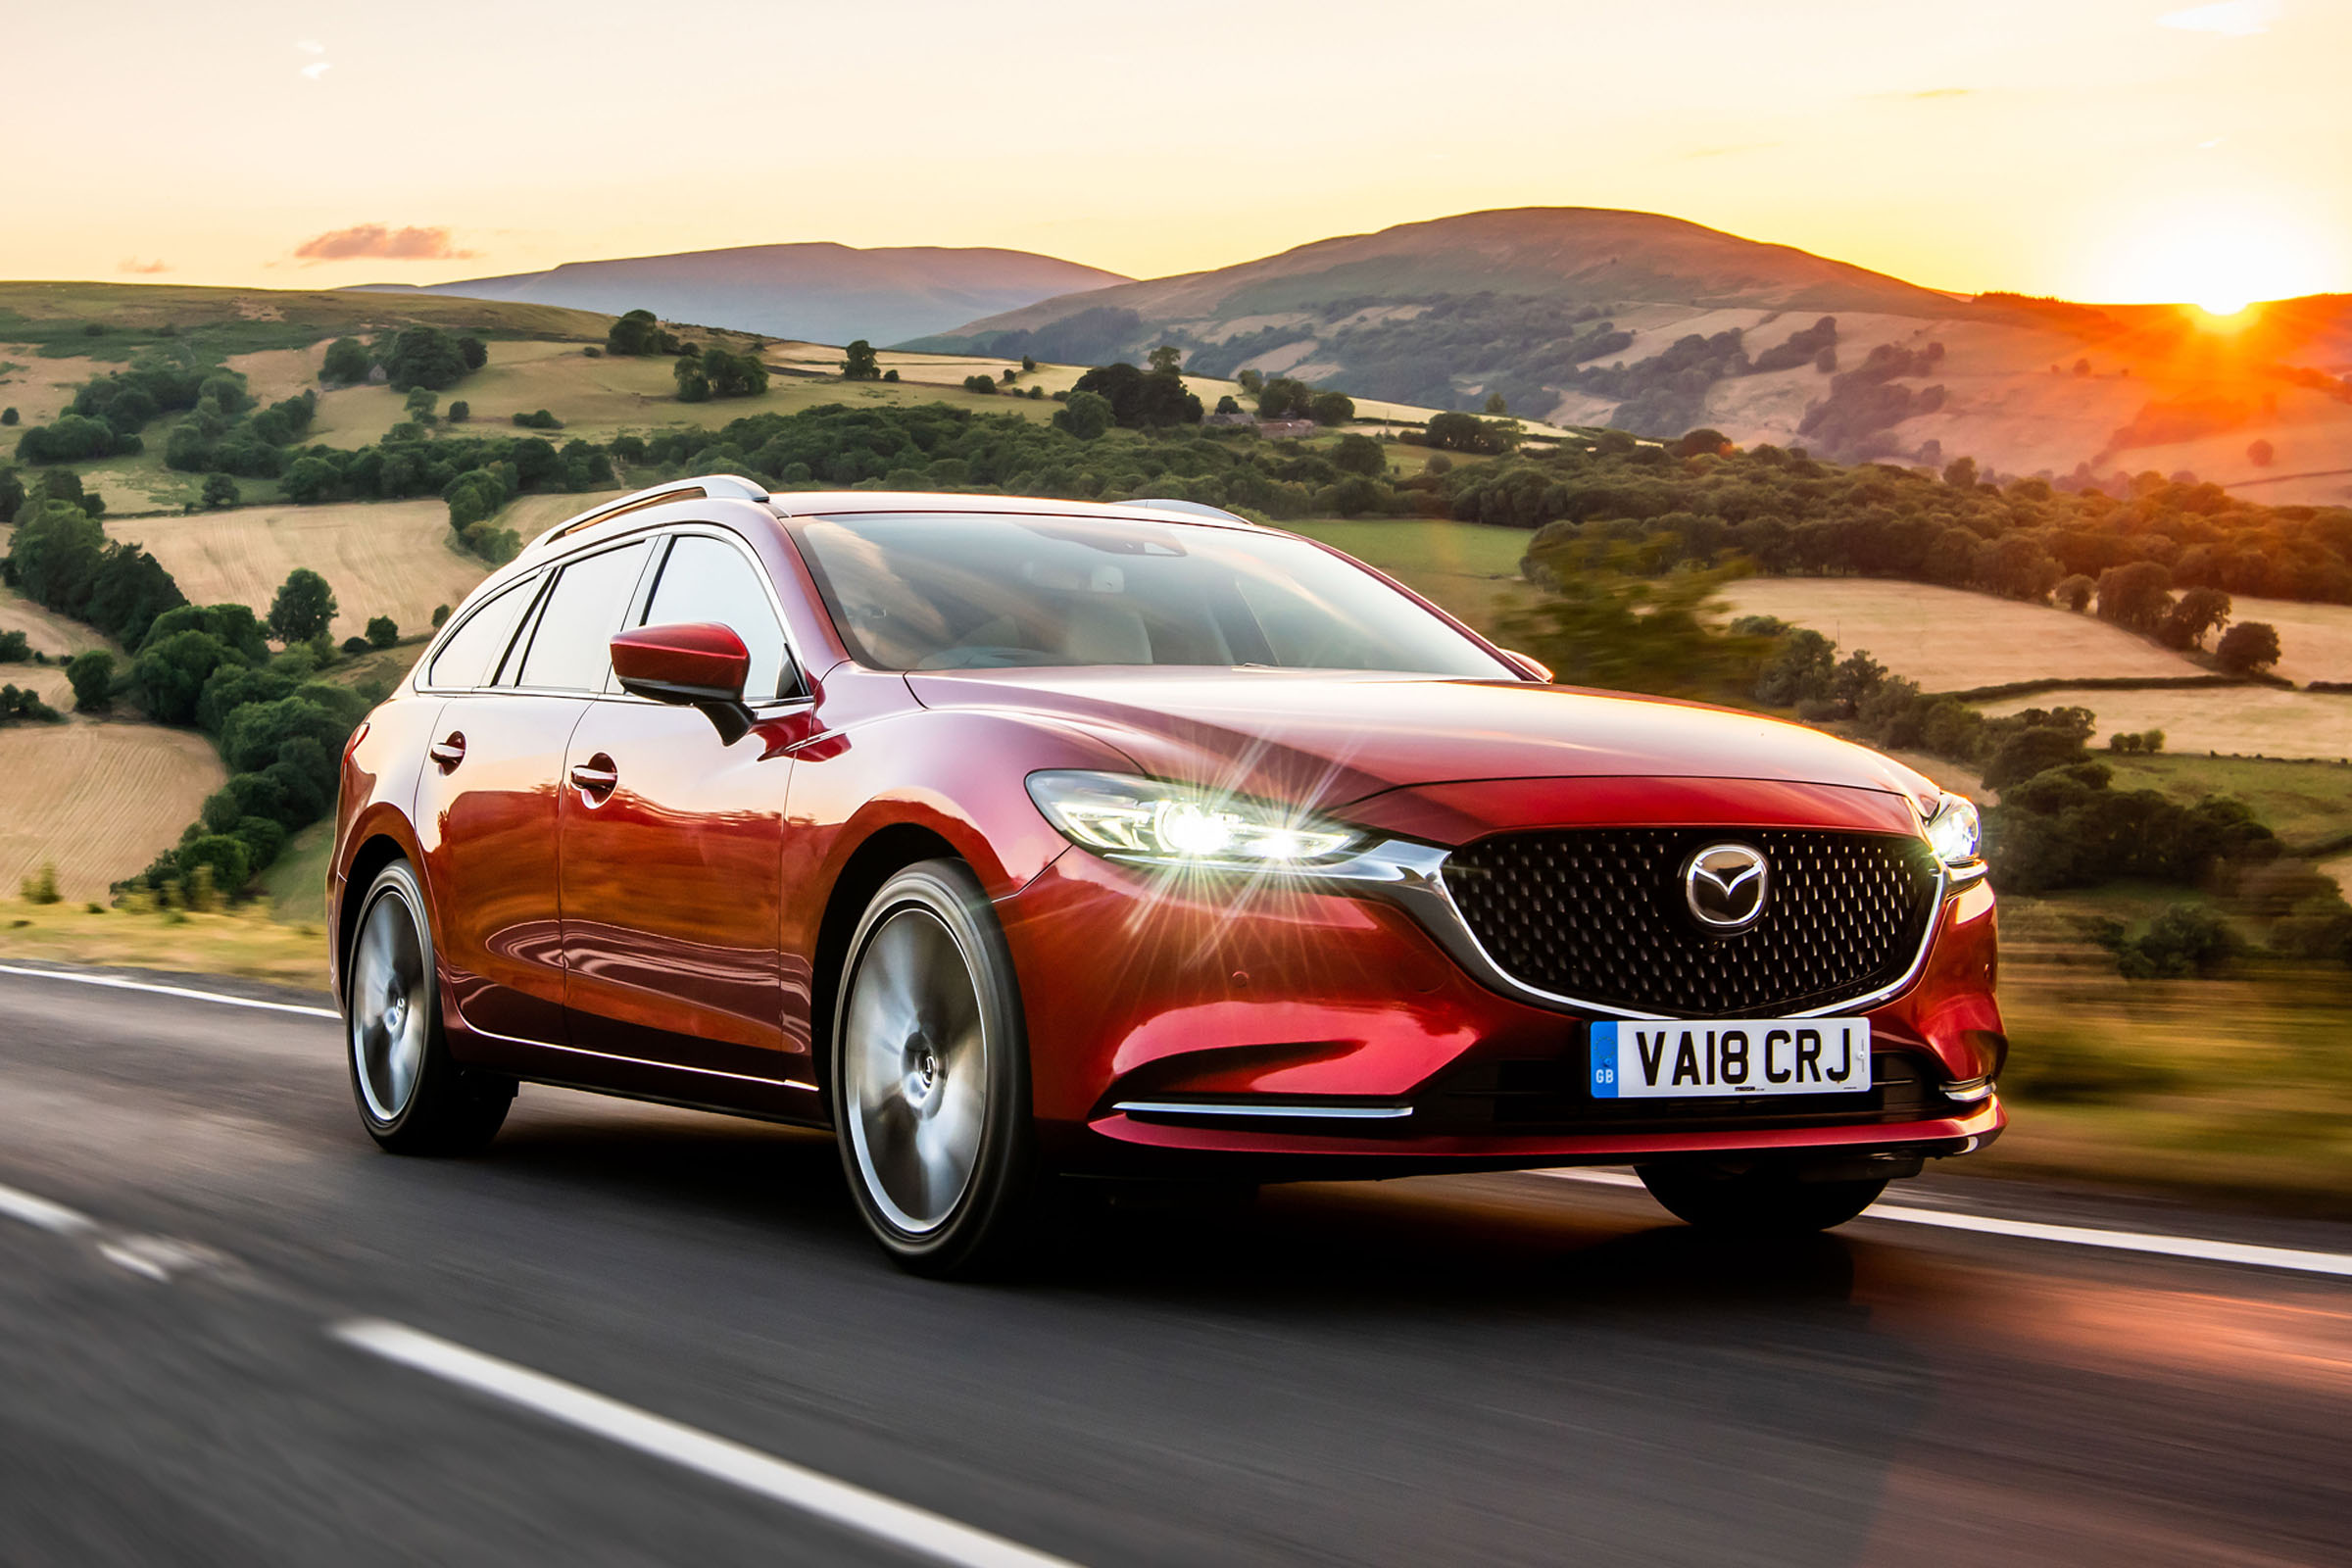 2018 Mazda 6 saloon & Tourer prices, specs and onsale